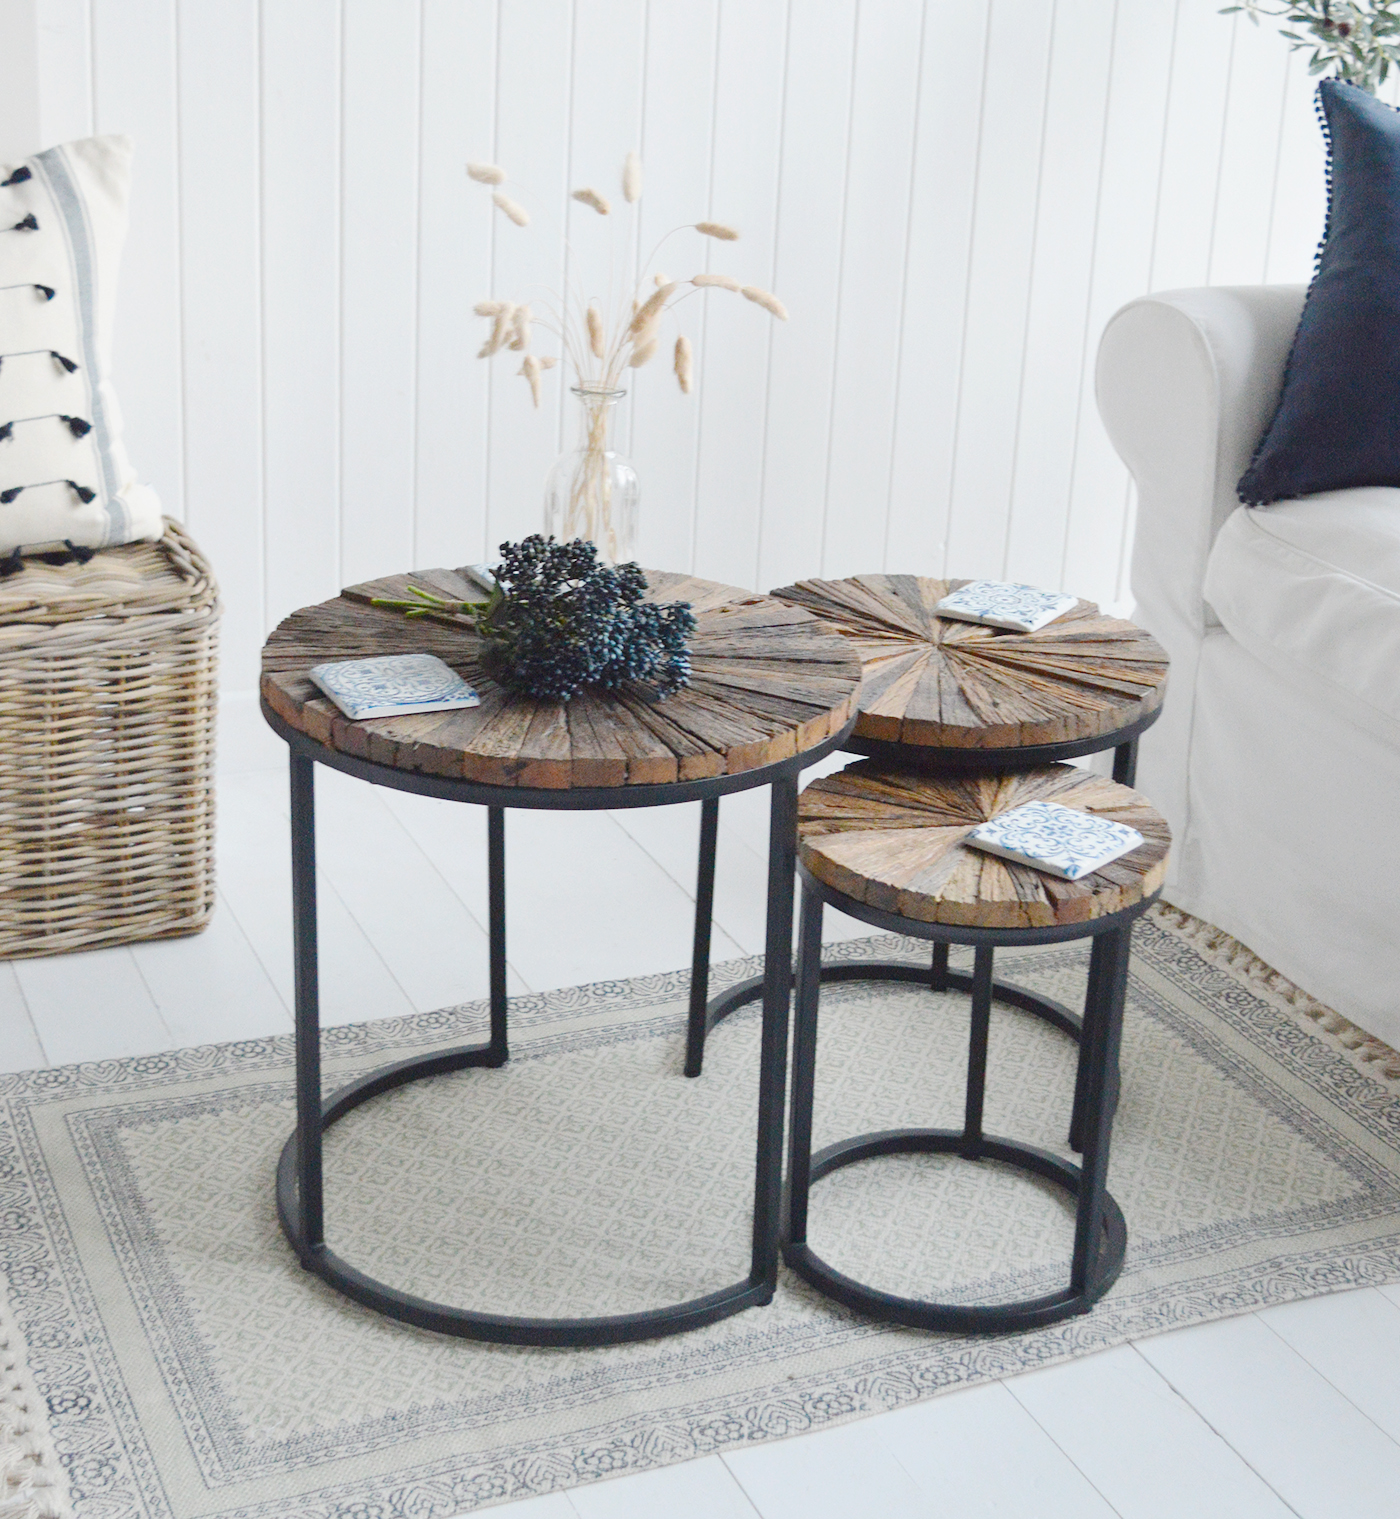 Woodstock nest of tables as a rustic coffee table for New England country, coastal and modern framhouse styled interiors for relaxed living room furniture